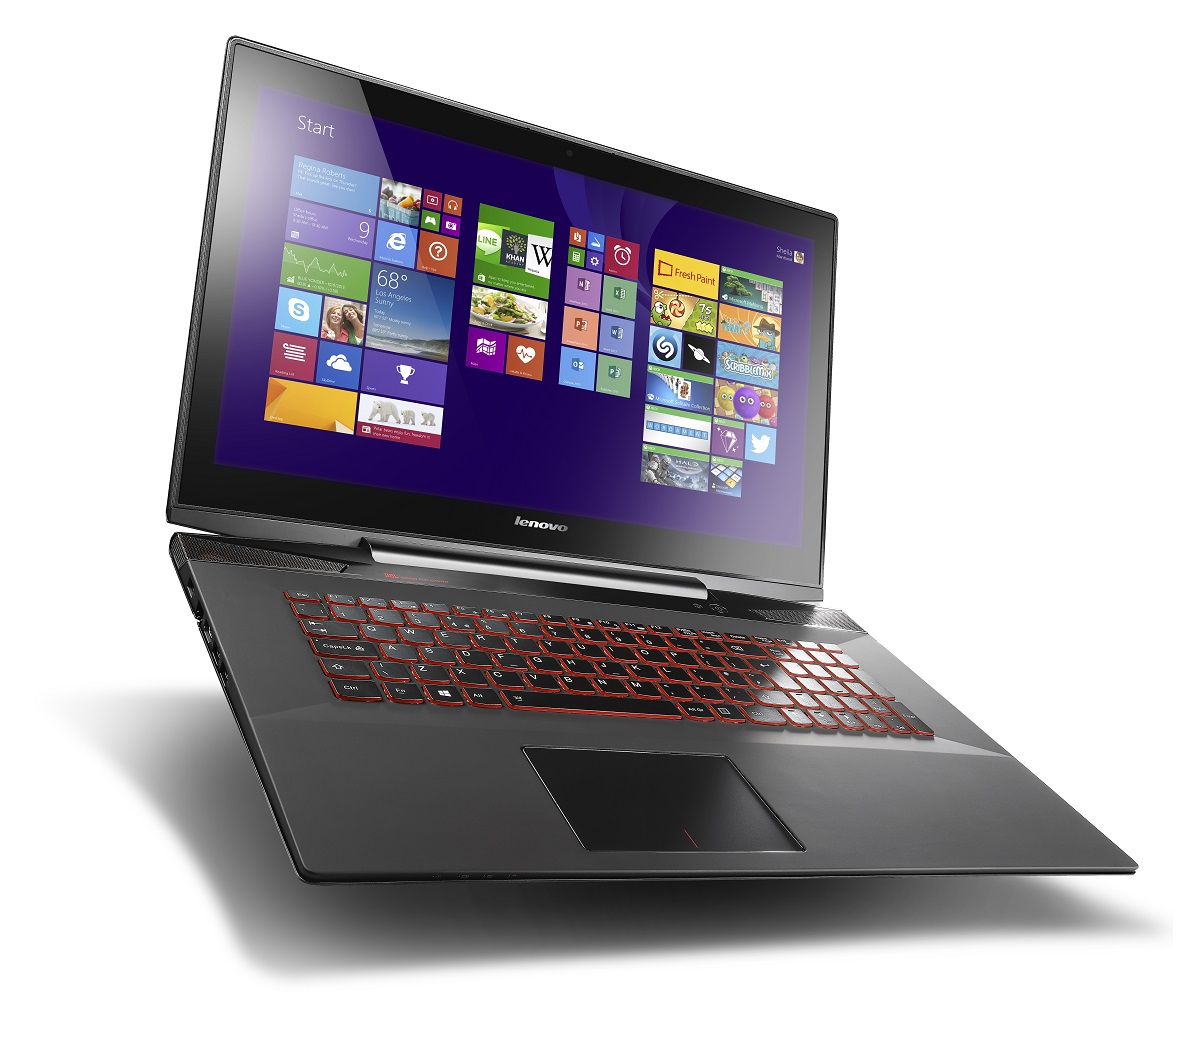  Lenovo  Offers Up New Android Tablet and Windows Gaming PC 